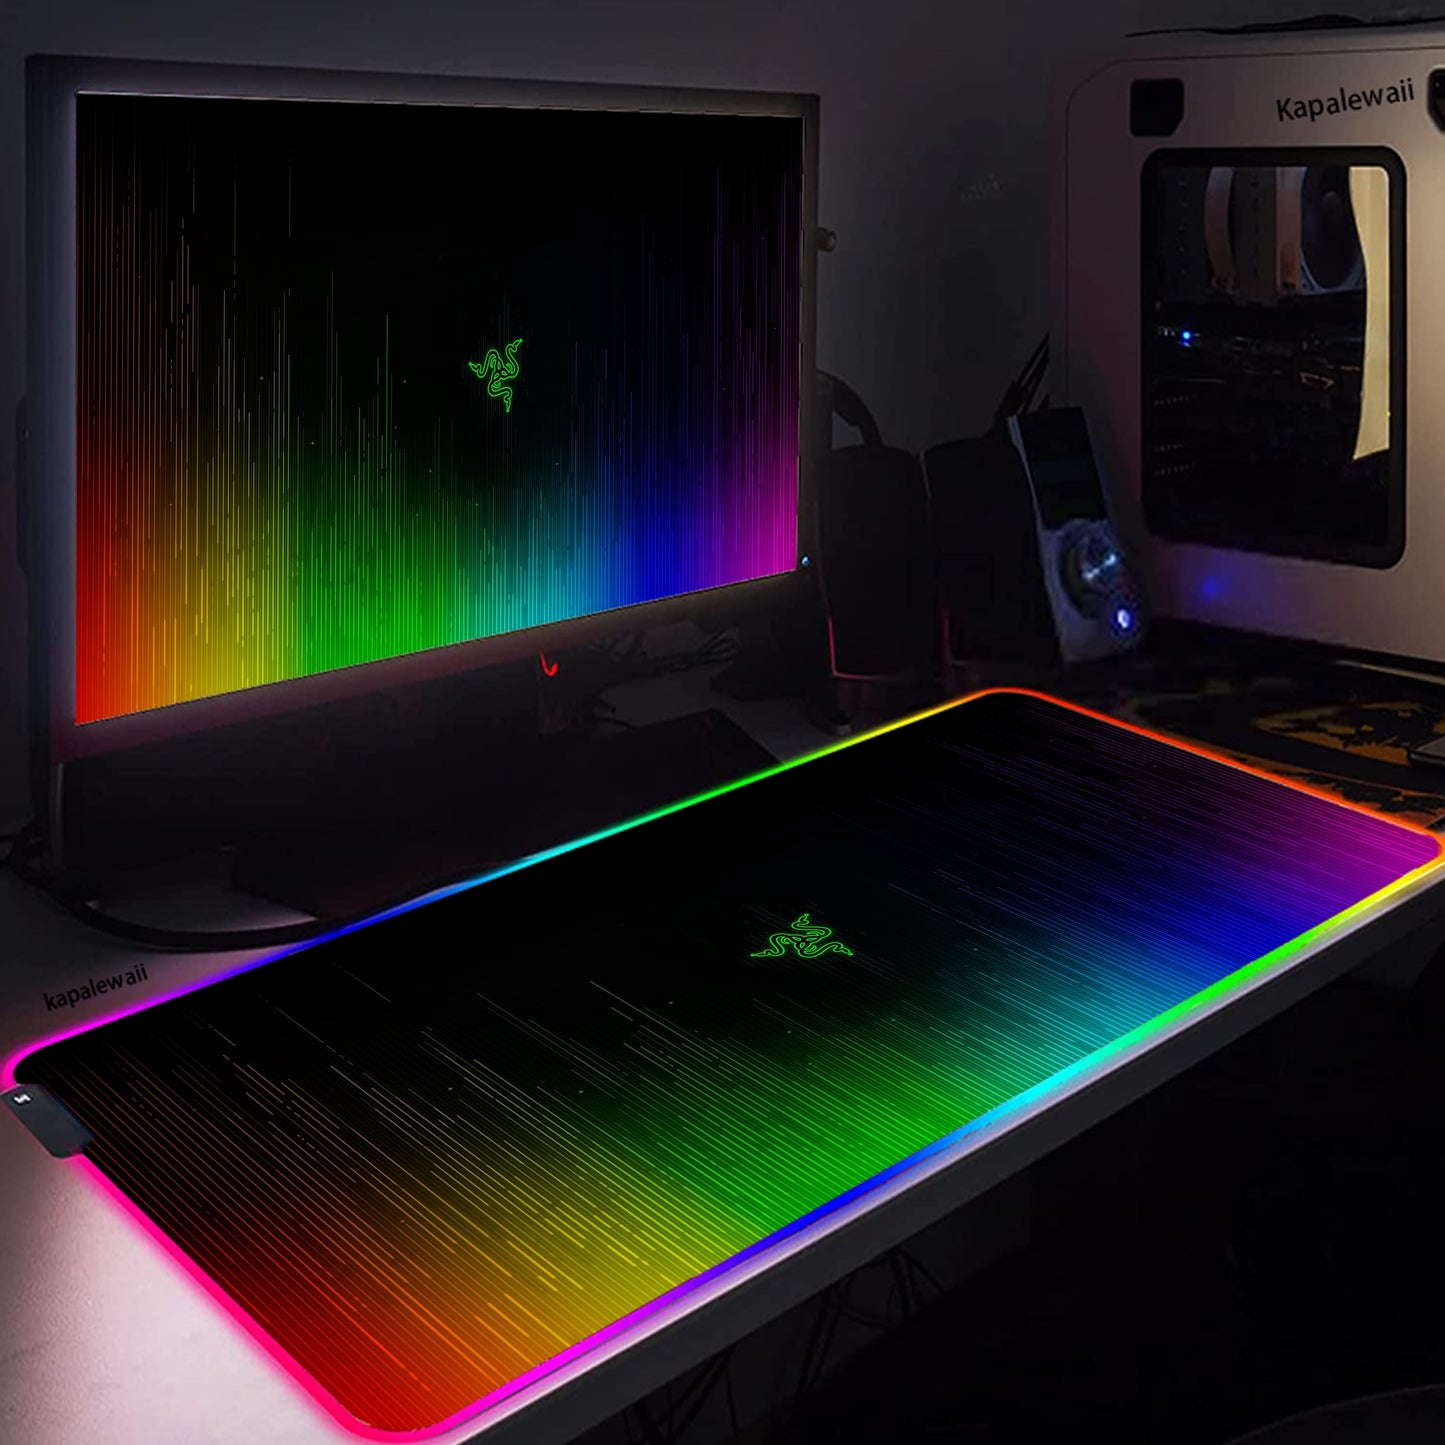 Razer Mouse Pad Gamer Gaming Notebook Mouse Mat Accessiores Keyboard Pad Large RGB 90x40cm Mousepad Gaming Mouse Mat Desk Mat